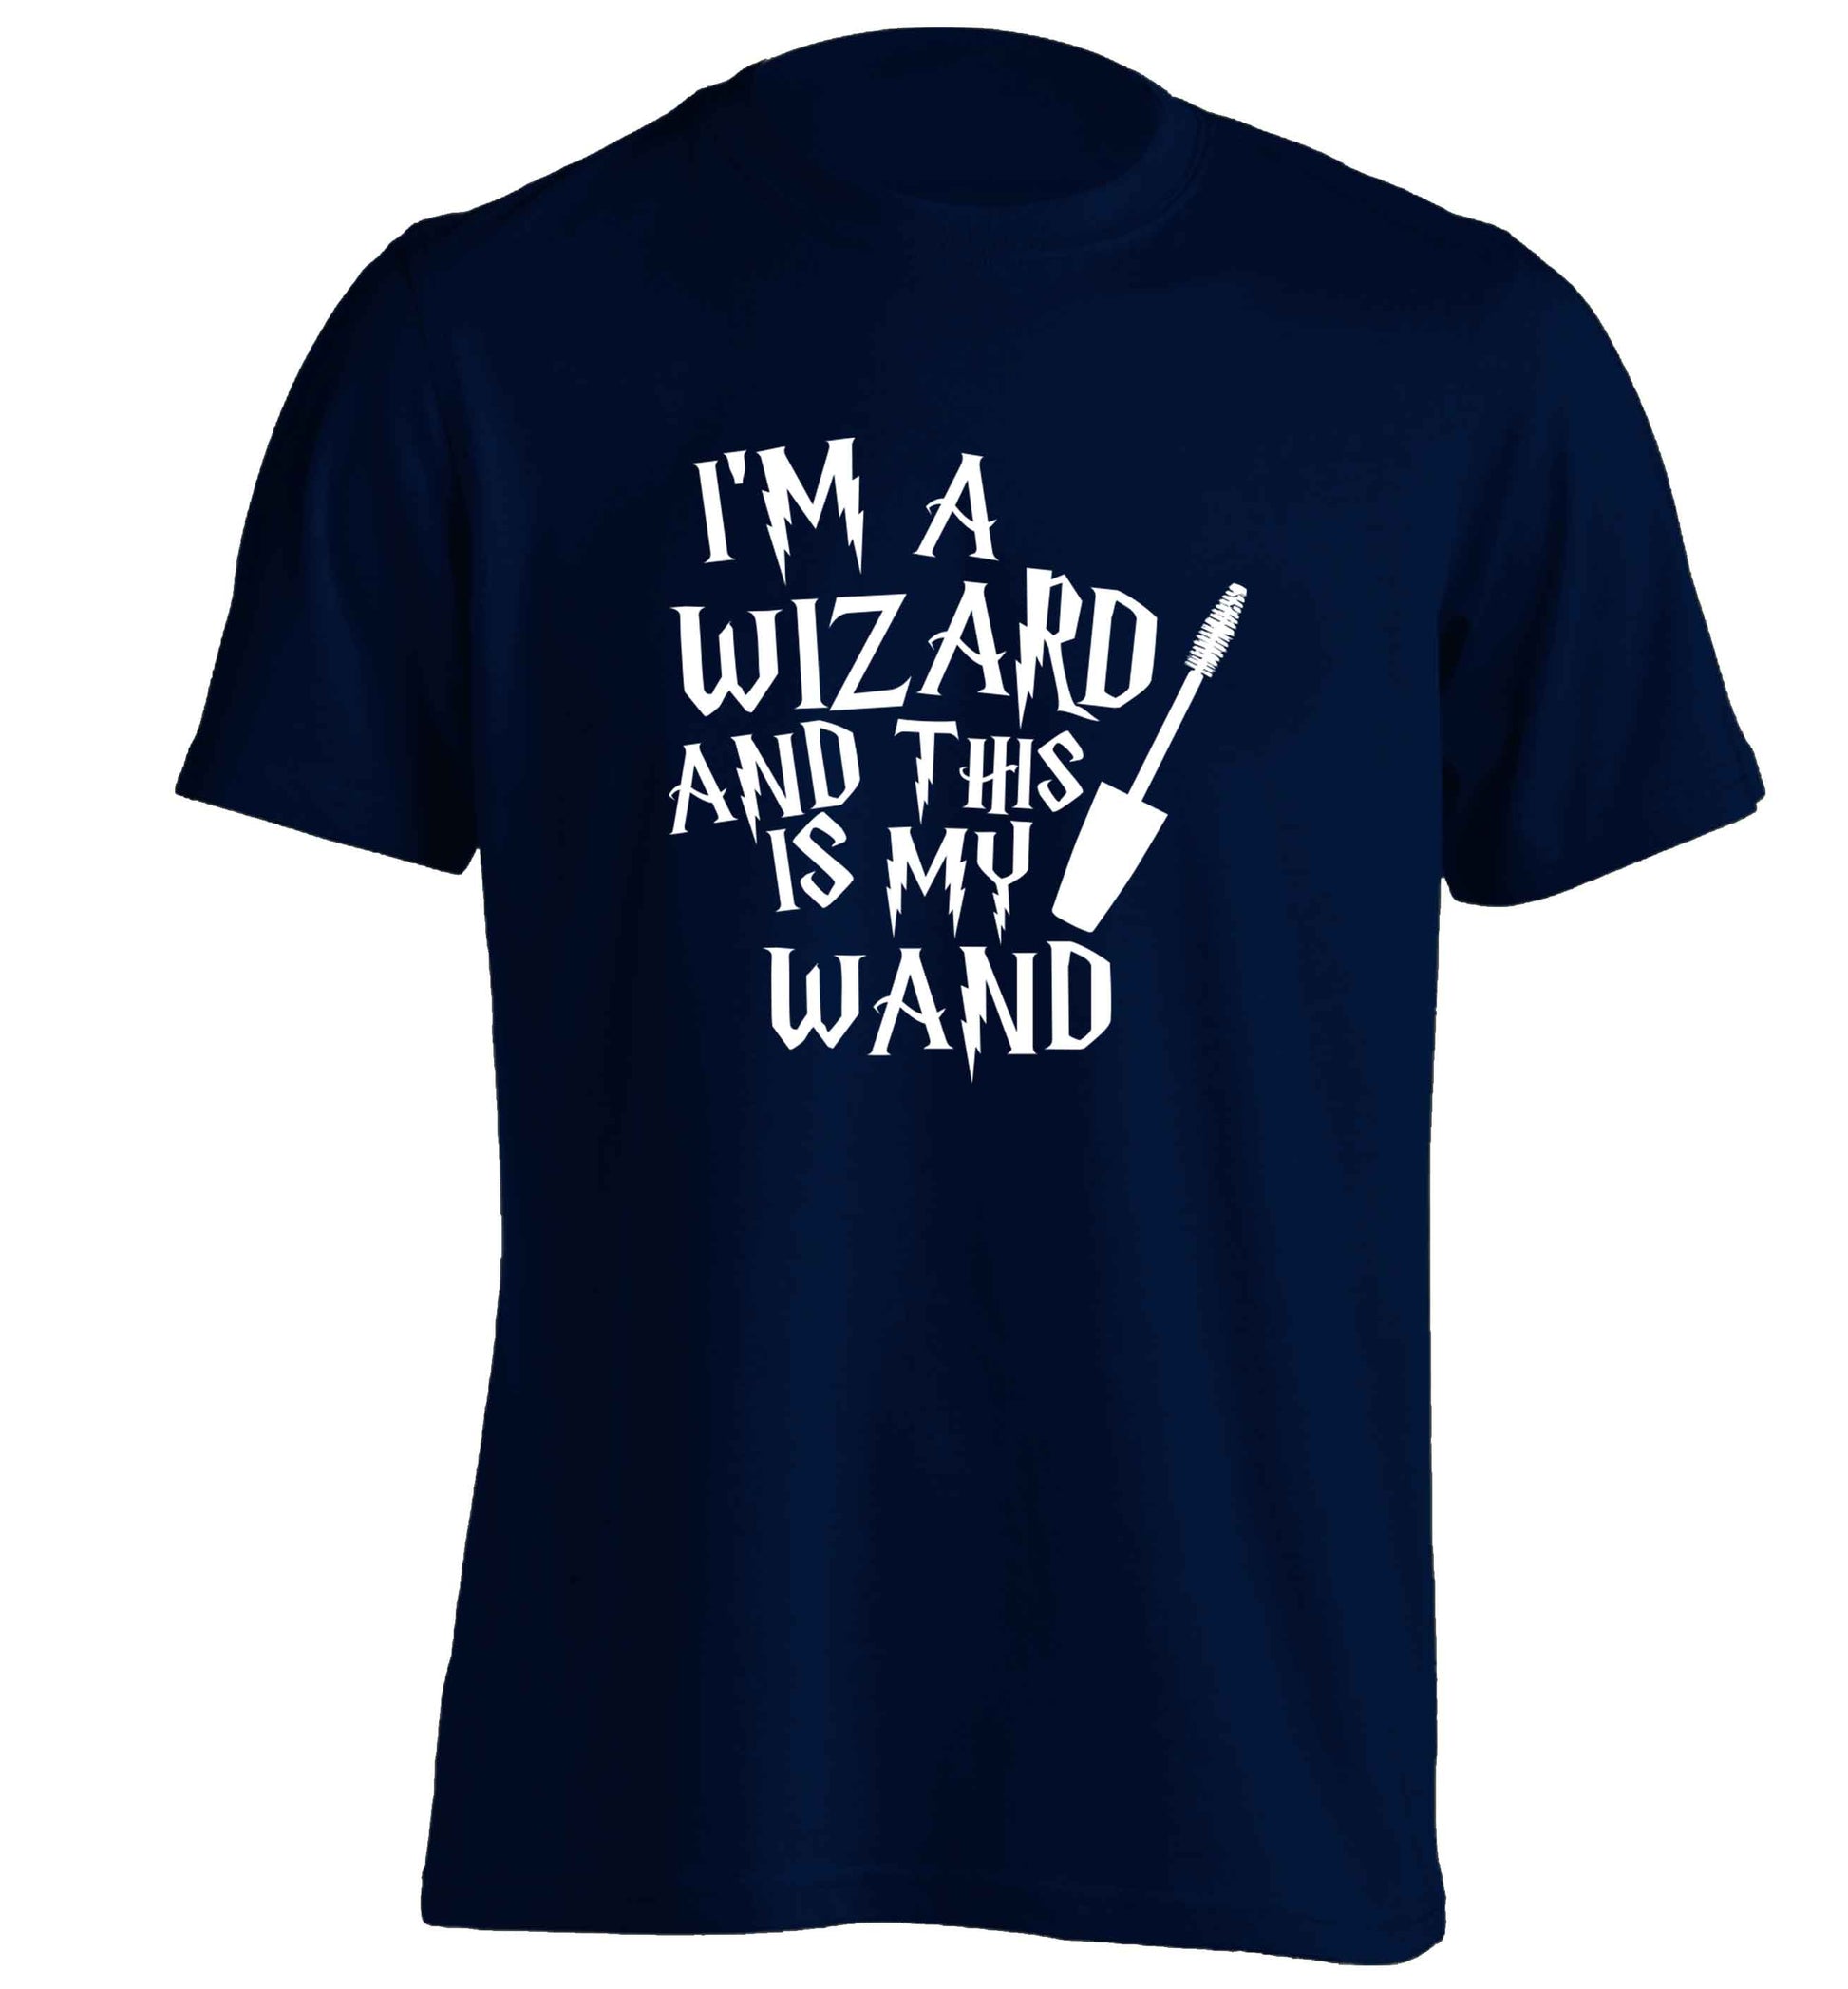 I'm a wizard and this is my wand adults unisex navy Tshirt 2XL